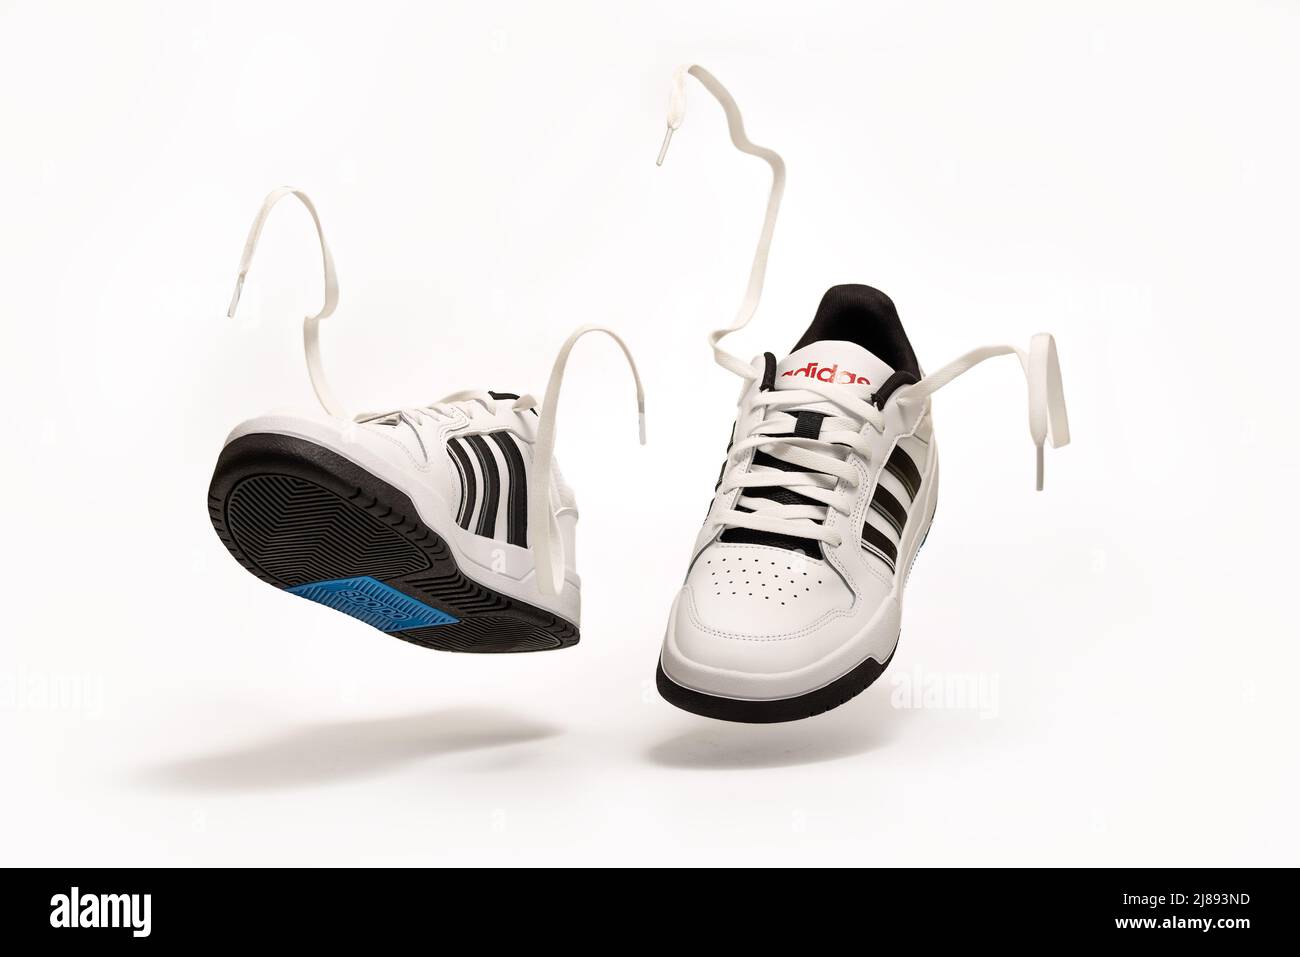 Belgrade, Serbia - May 12, 2022. New Adidas tennis shoes on white background with clipping path included. New Adidas Sneakers or trainers on white bac Stock Photo